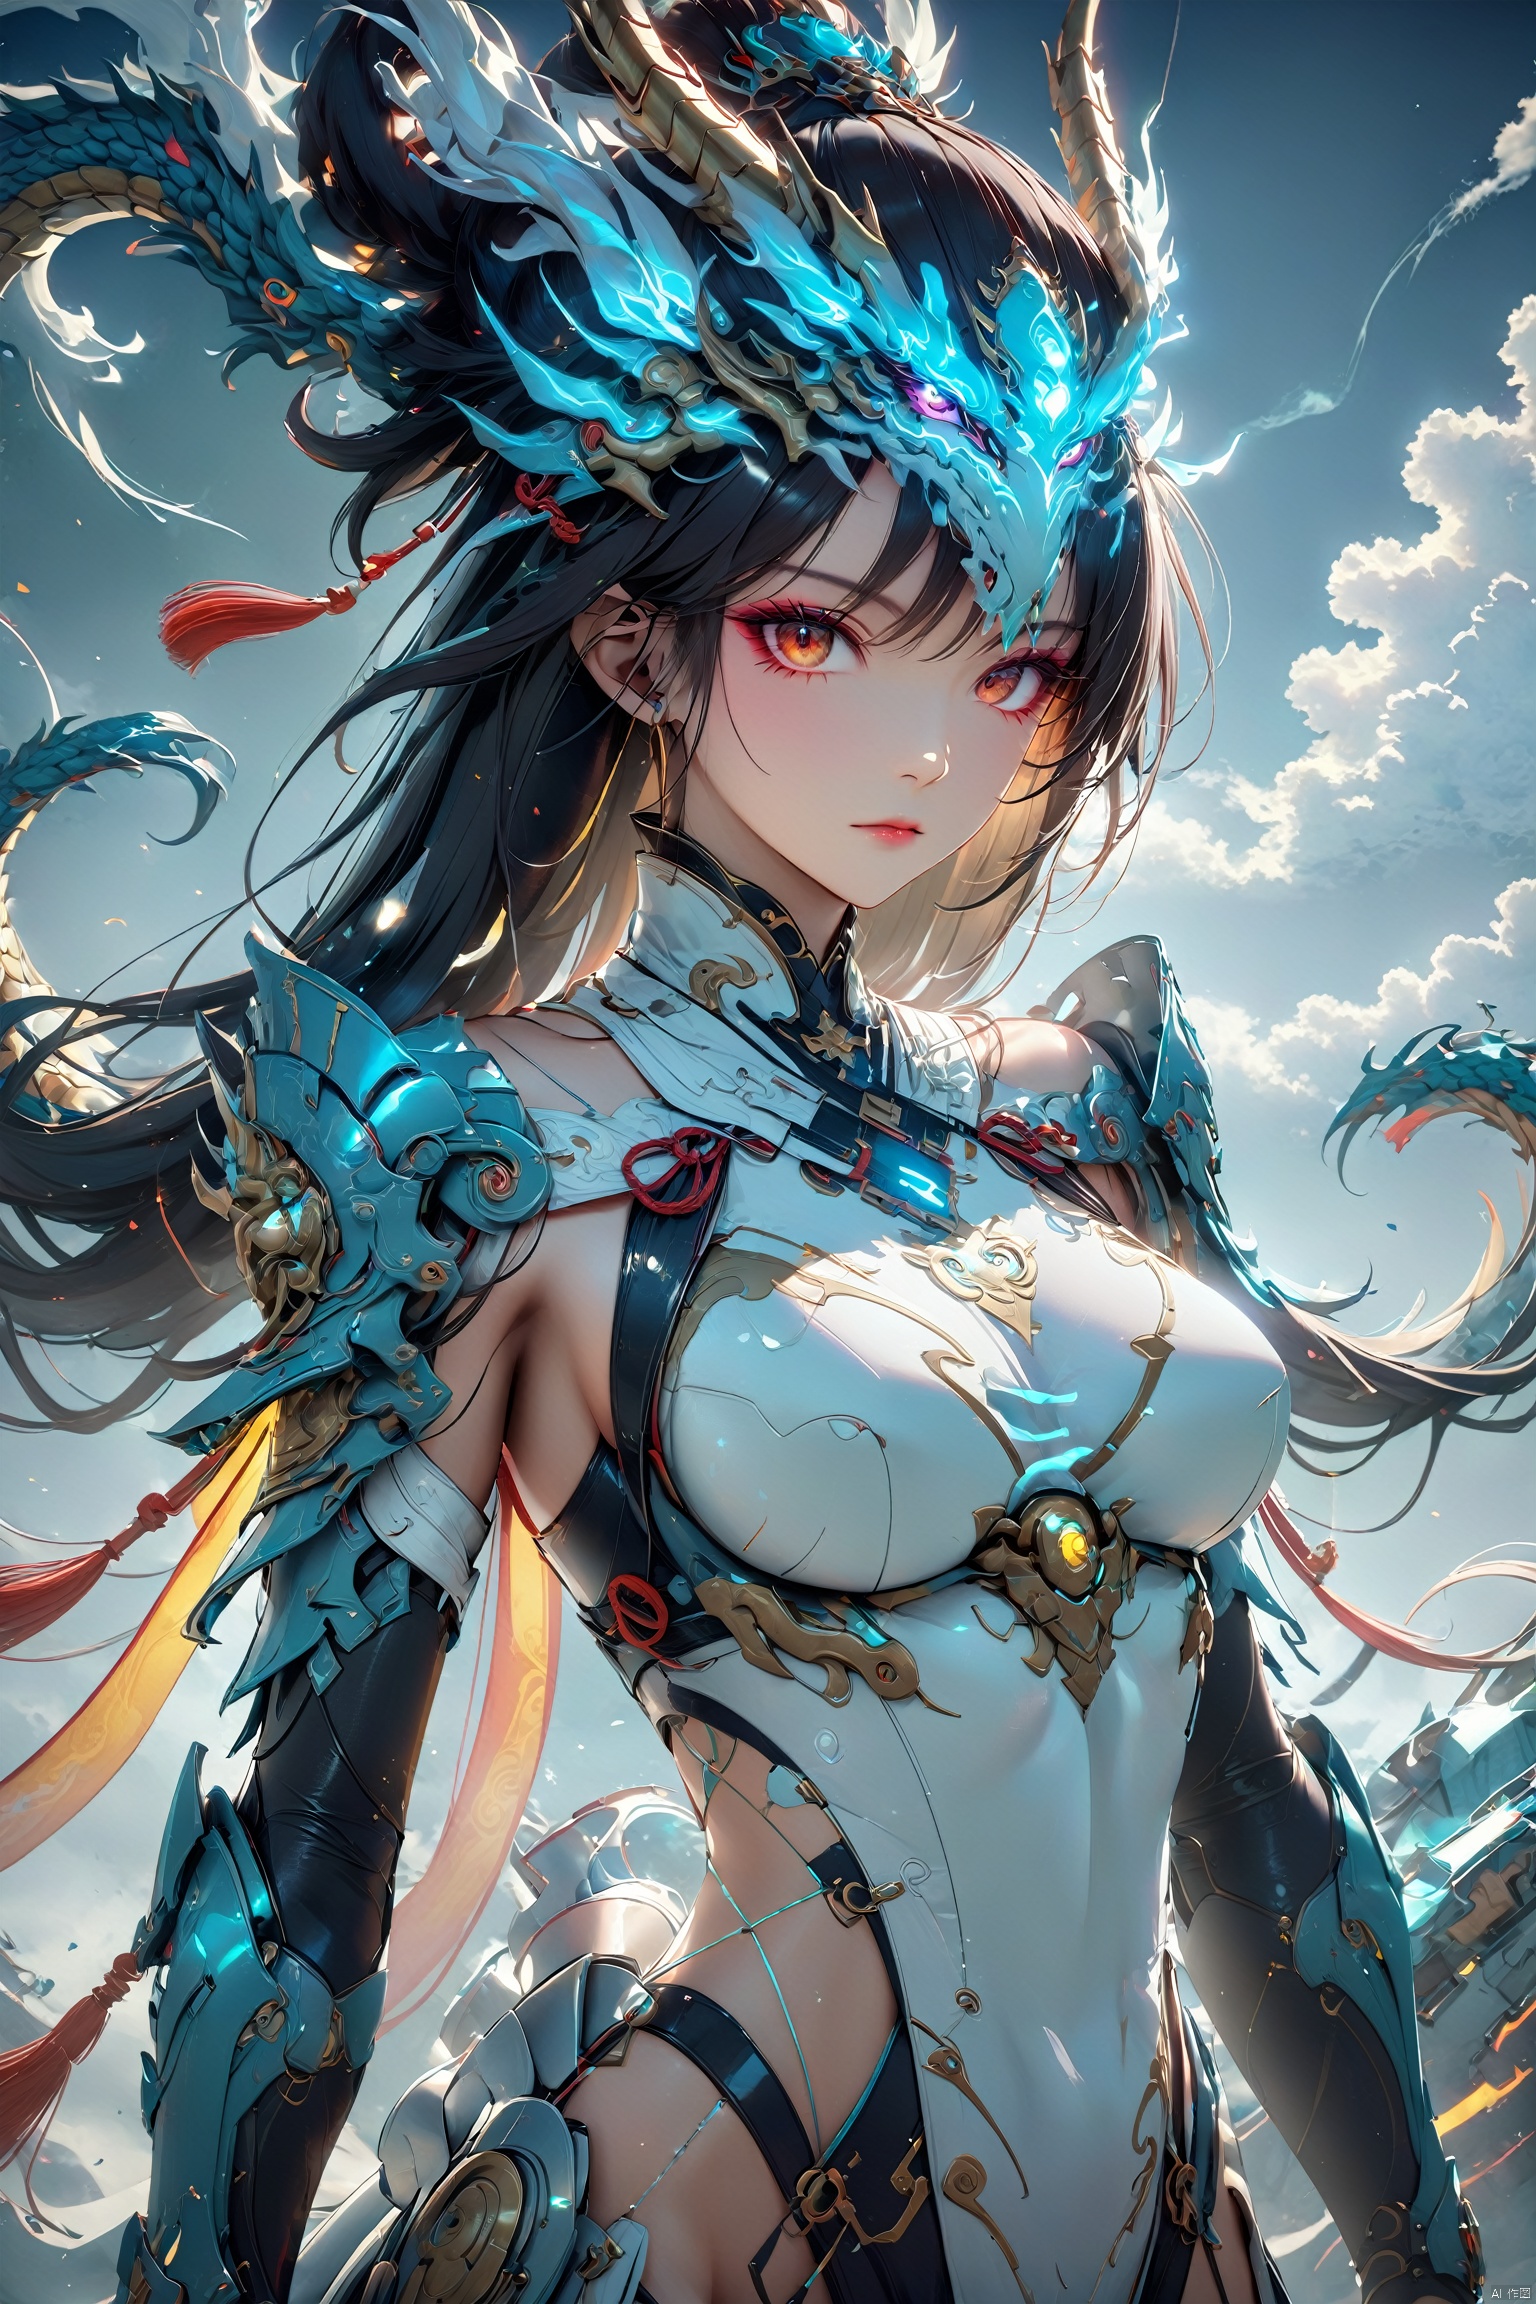 32K ultra-high resolution,full-body portrait of a classical female mech-warrior,seamlessly integrating Tang Dynasty armor with futuristic elements,embellished with luminous Yunlong (cloud dragon) and Taotie (beast face) motifs,constructed with advanced sci-fi materials,rendered in Unreal Engine for hyperrealistic detail,blending realism with surrealistic touches,